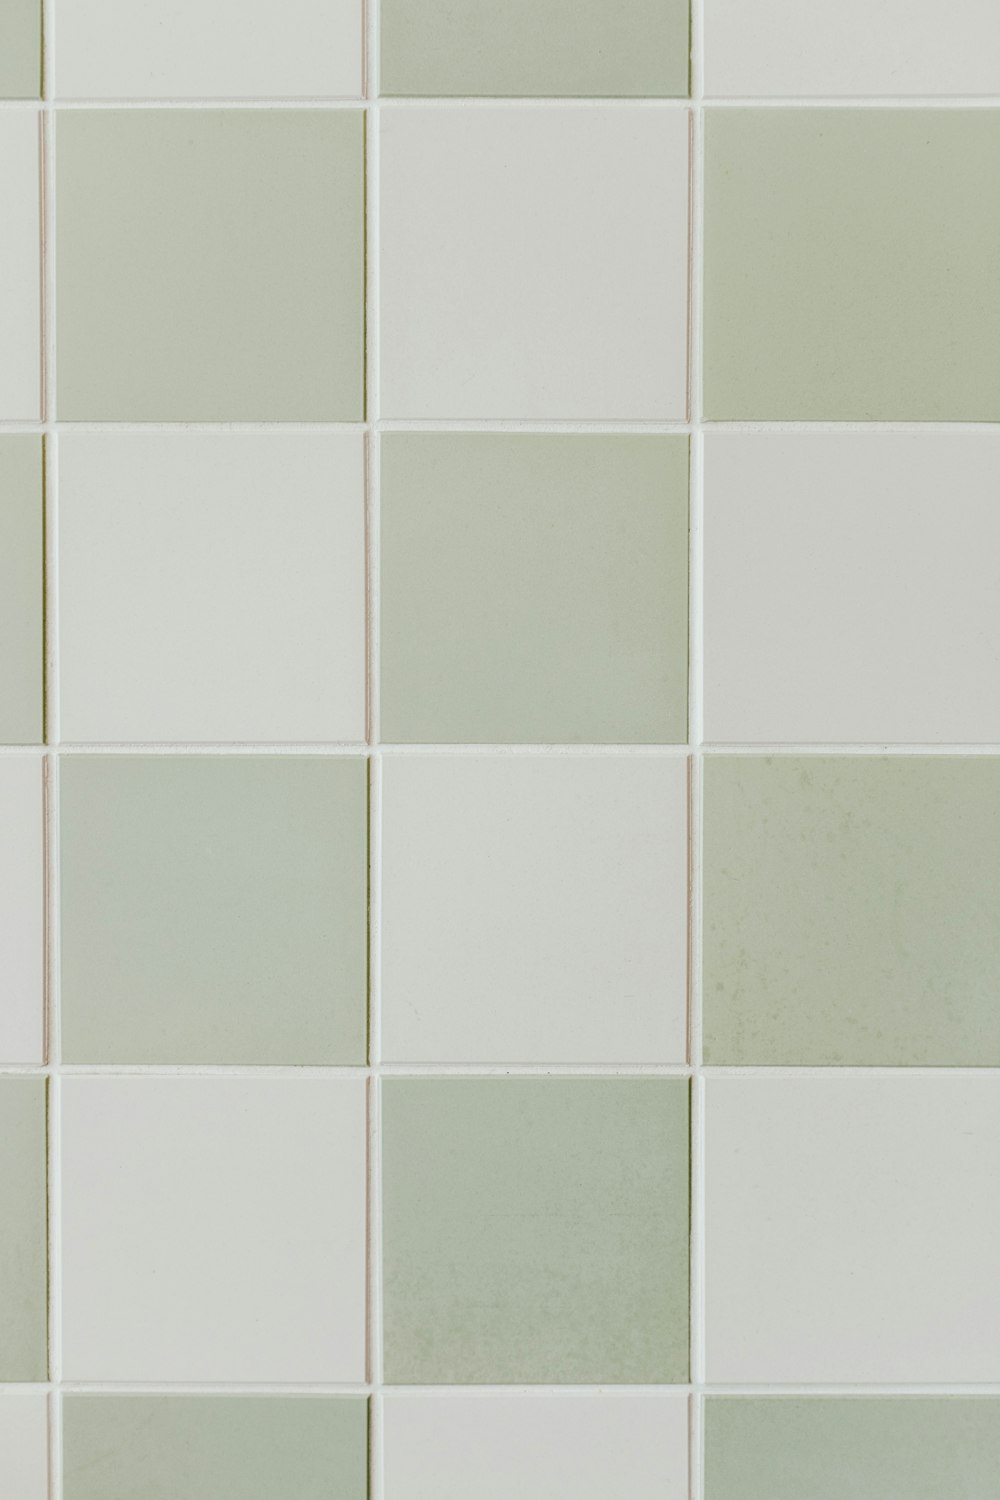 gray and white tiles